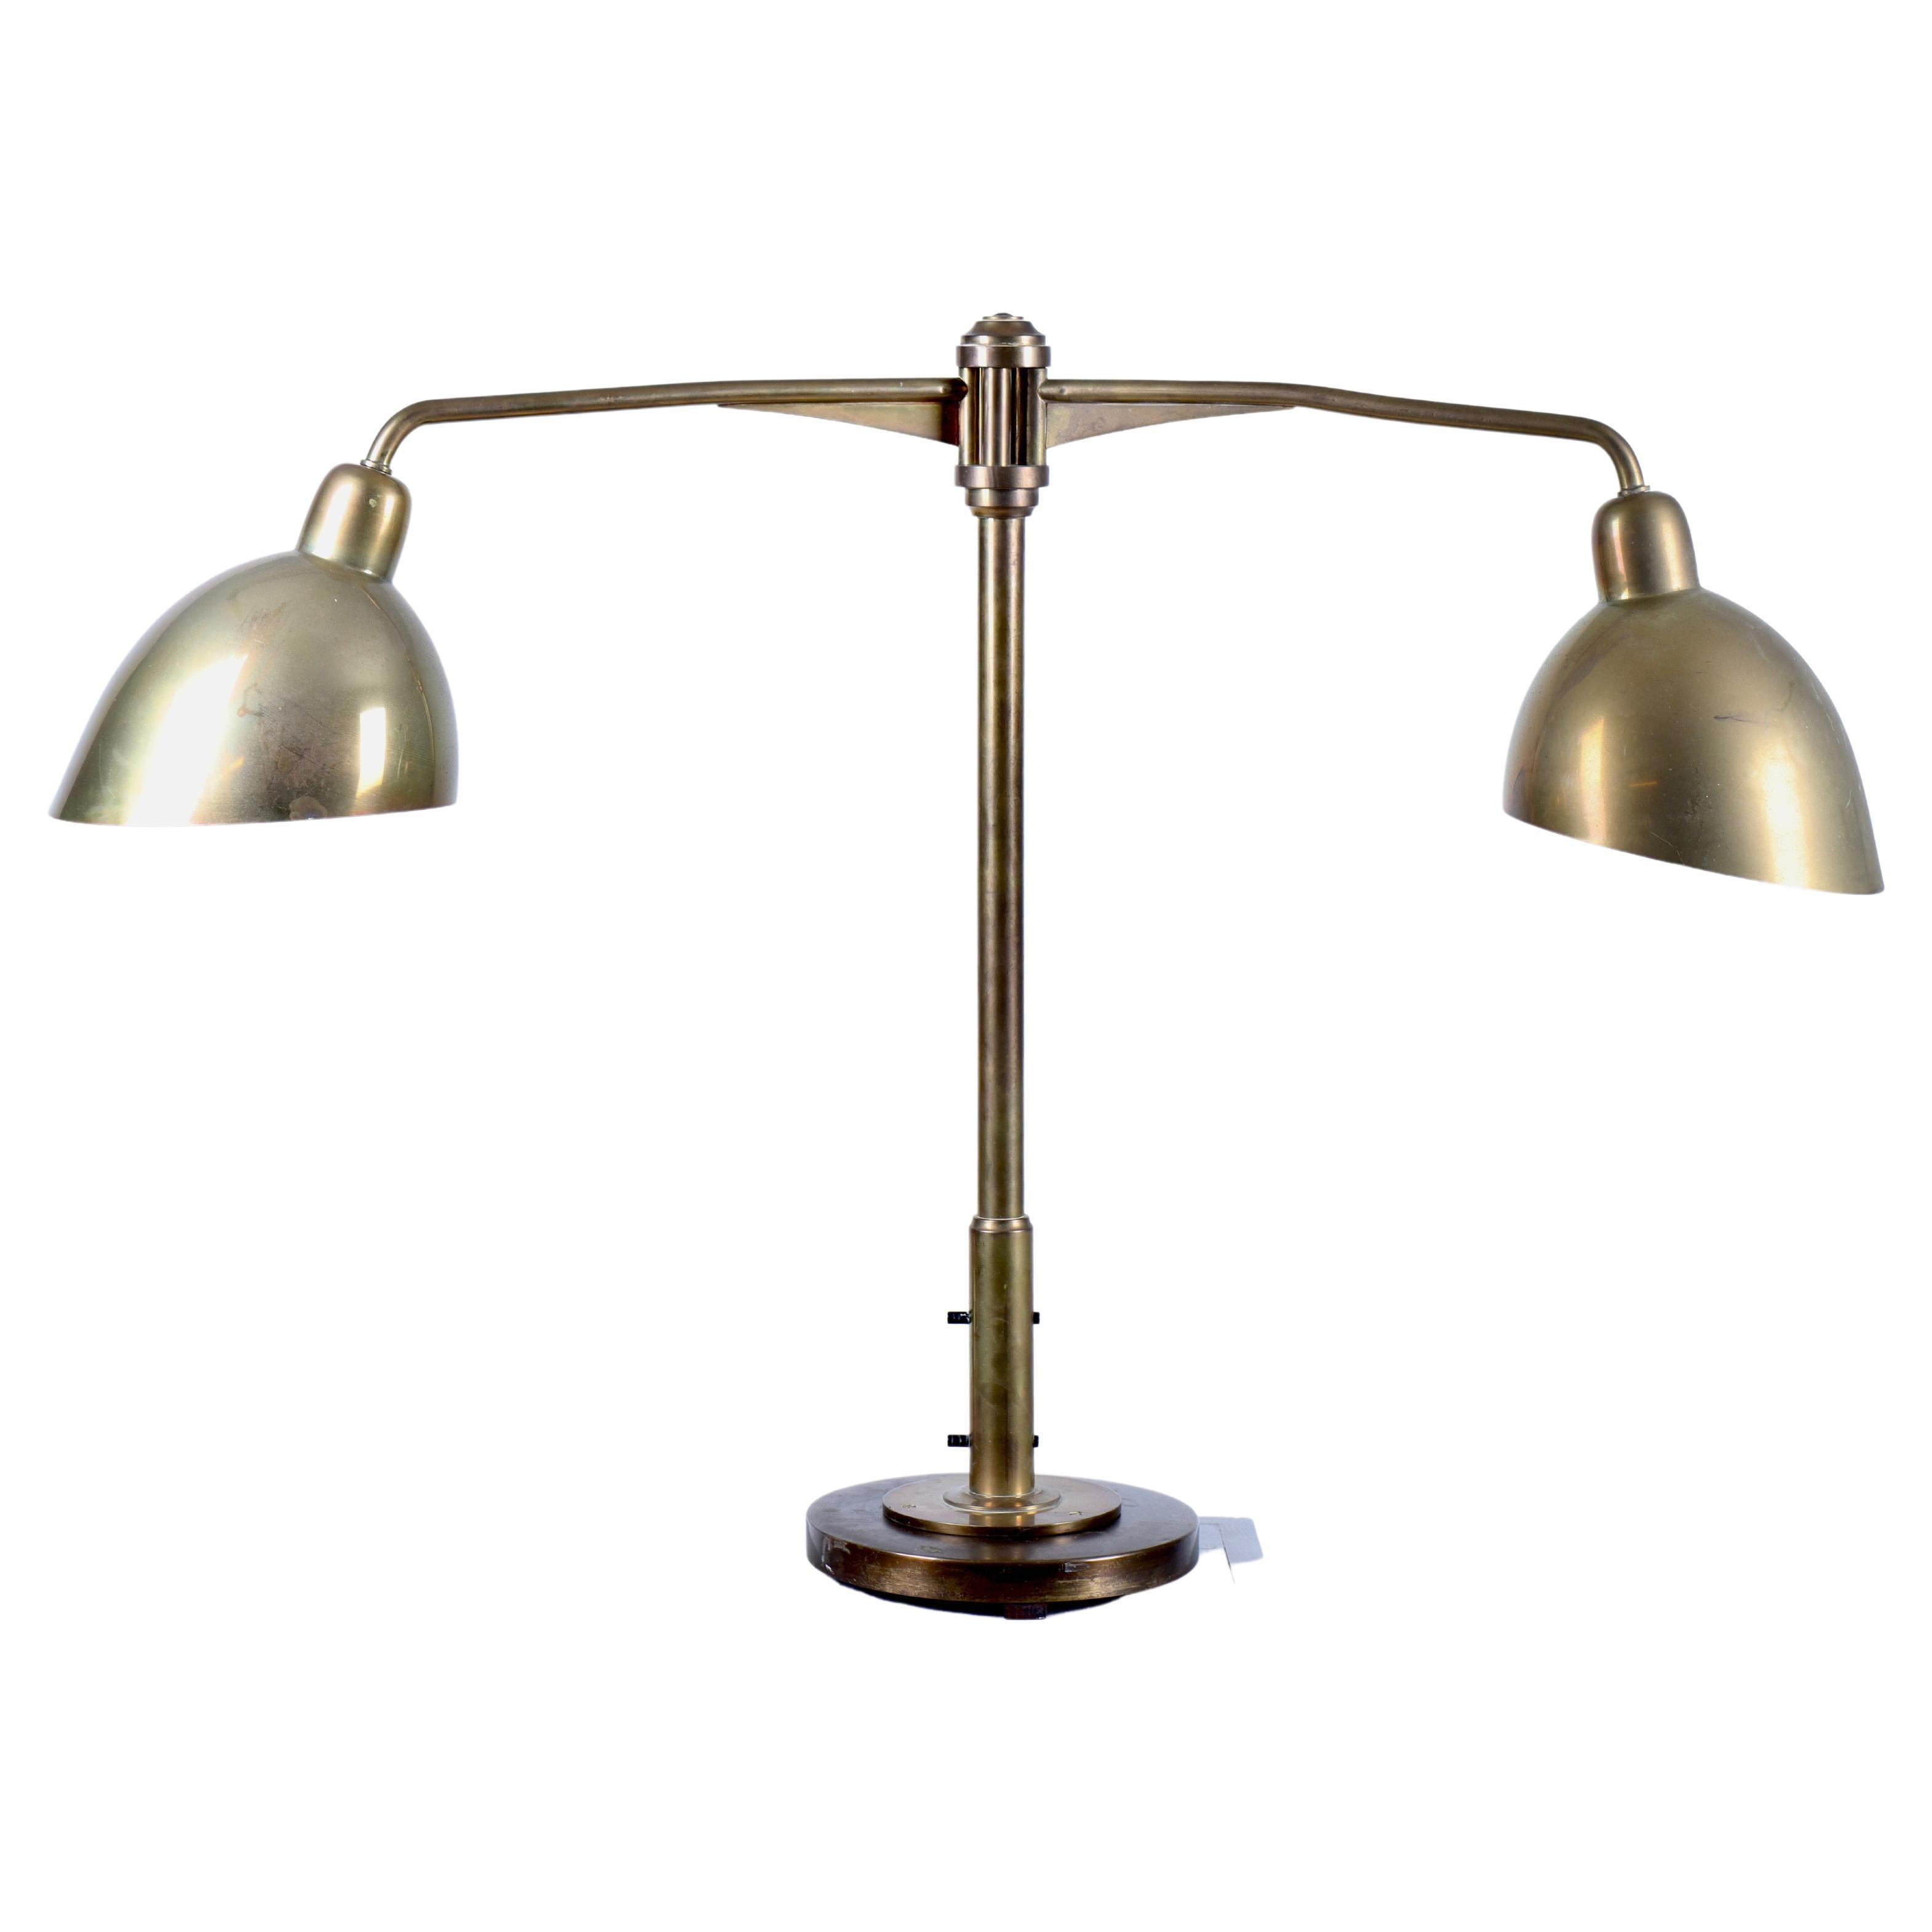 Double Table Lamp in Brass by Louis Poulsen, 1940s For Sale